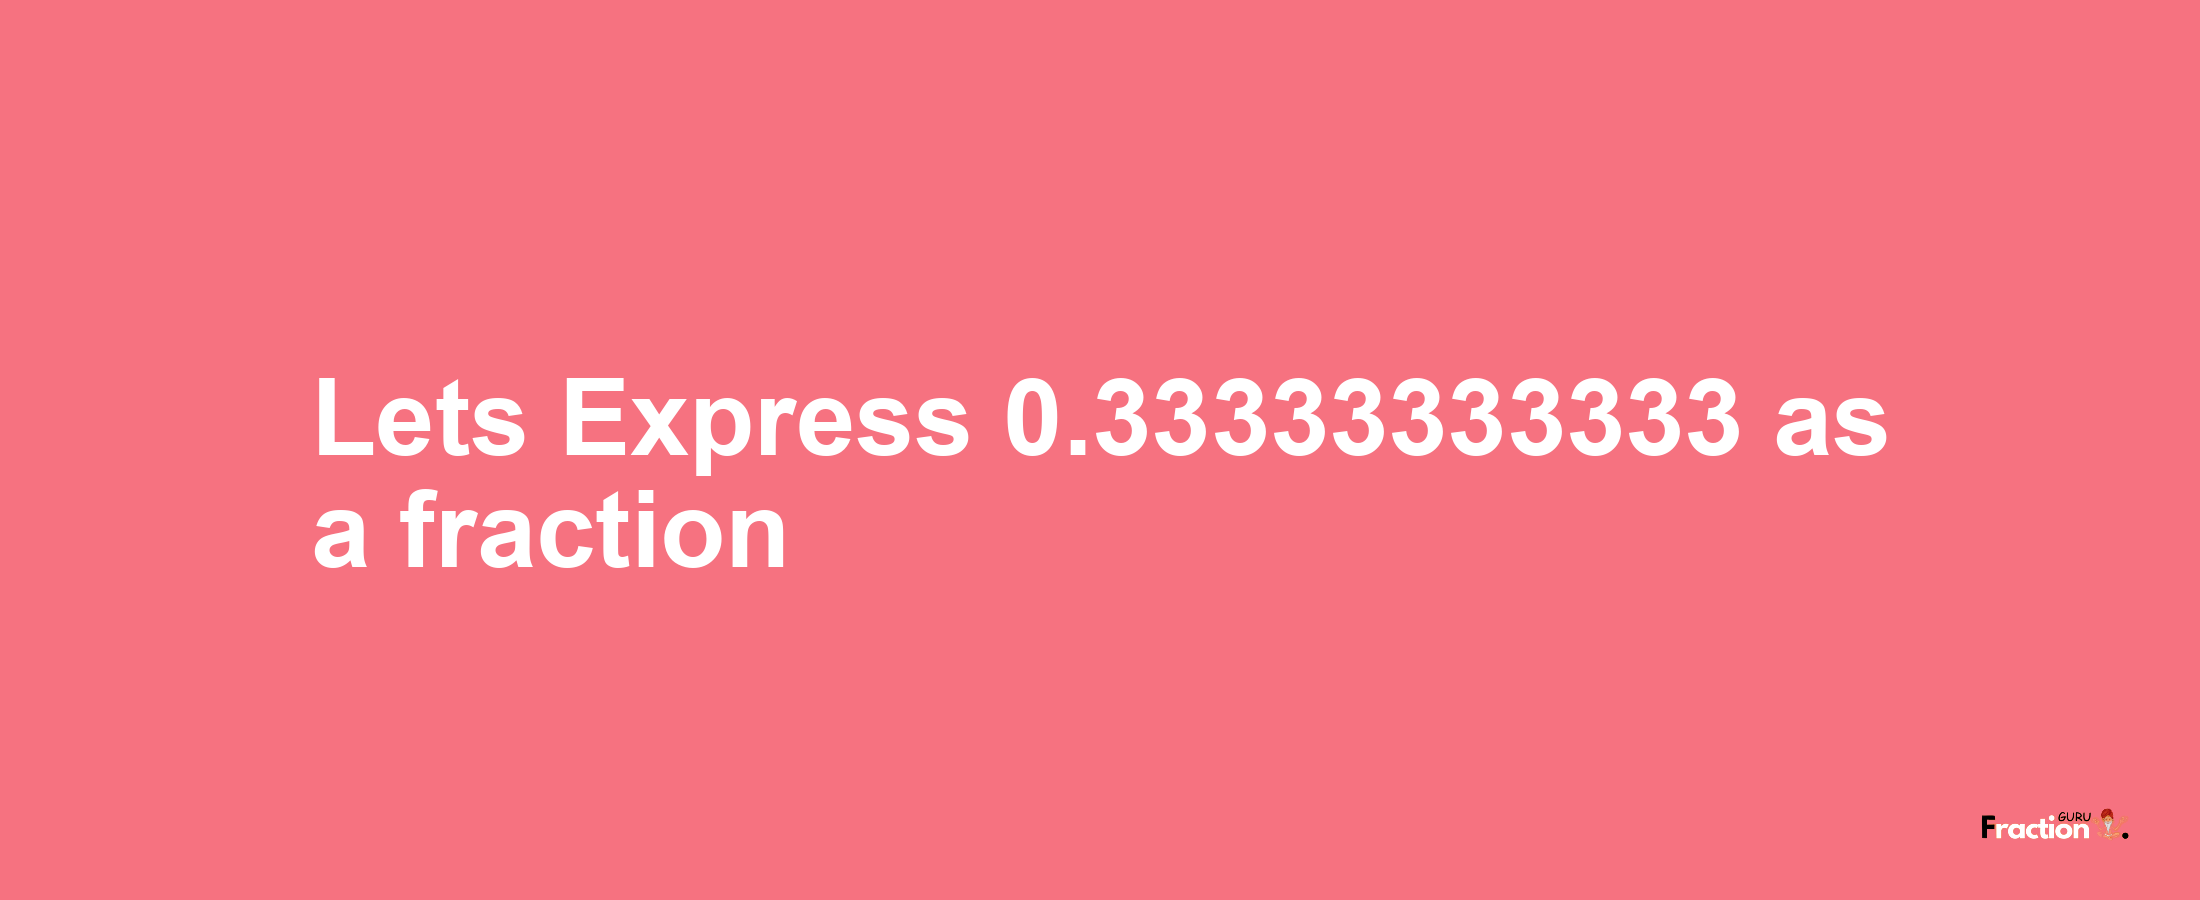 Lets Express 0.33333333333 as afraction